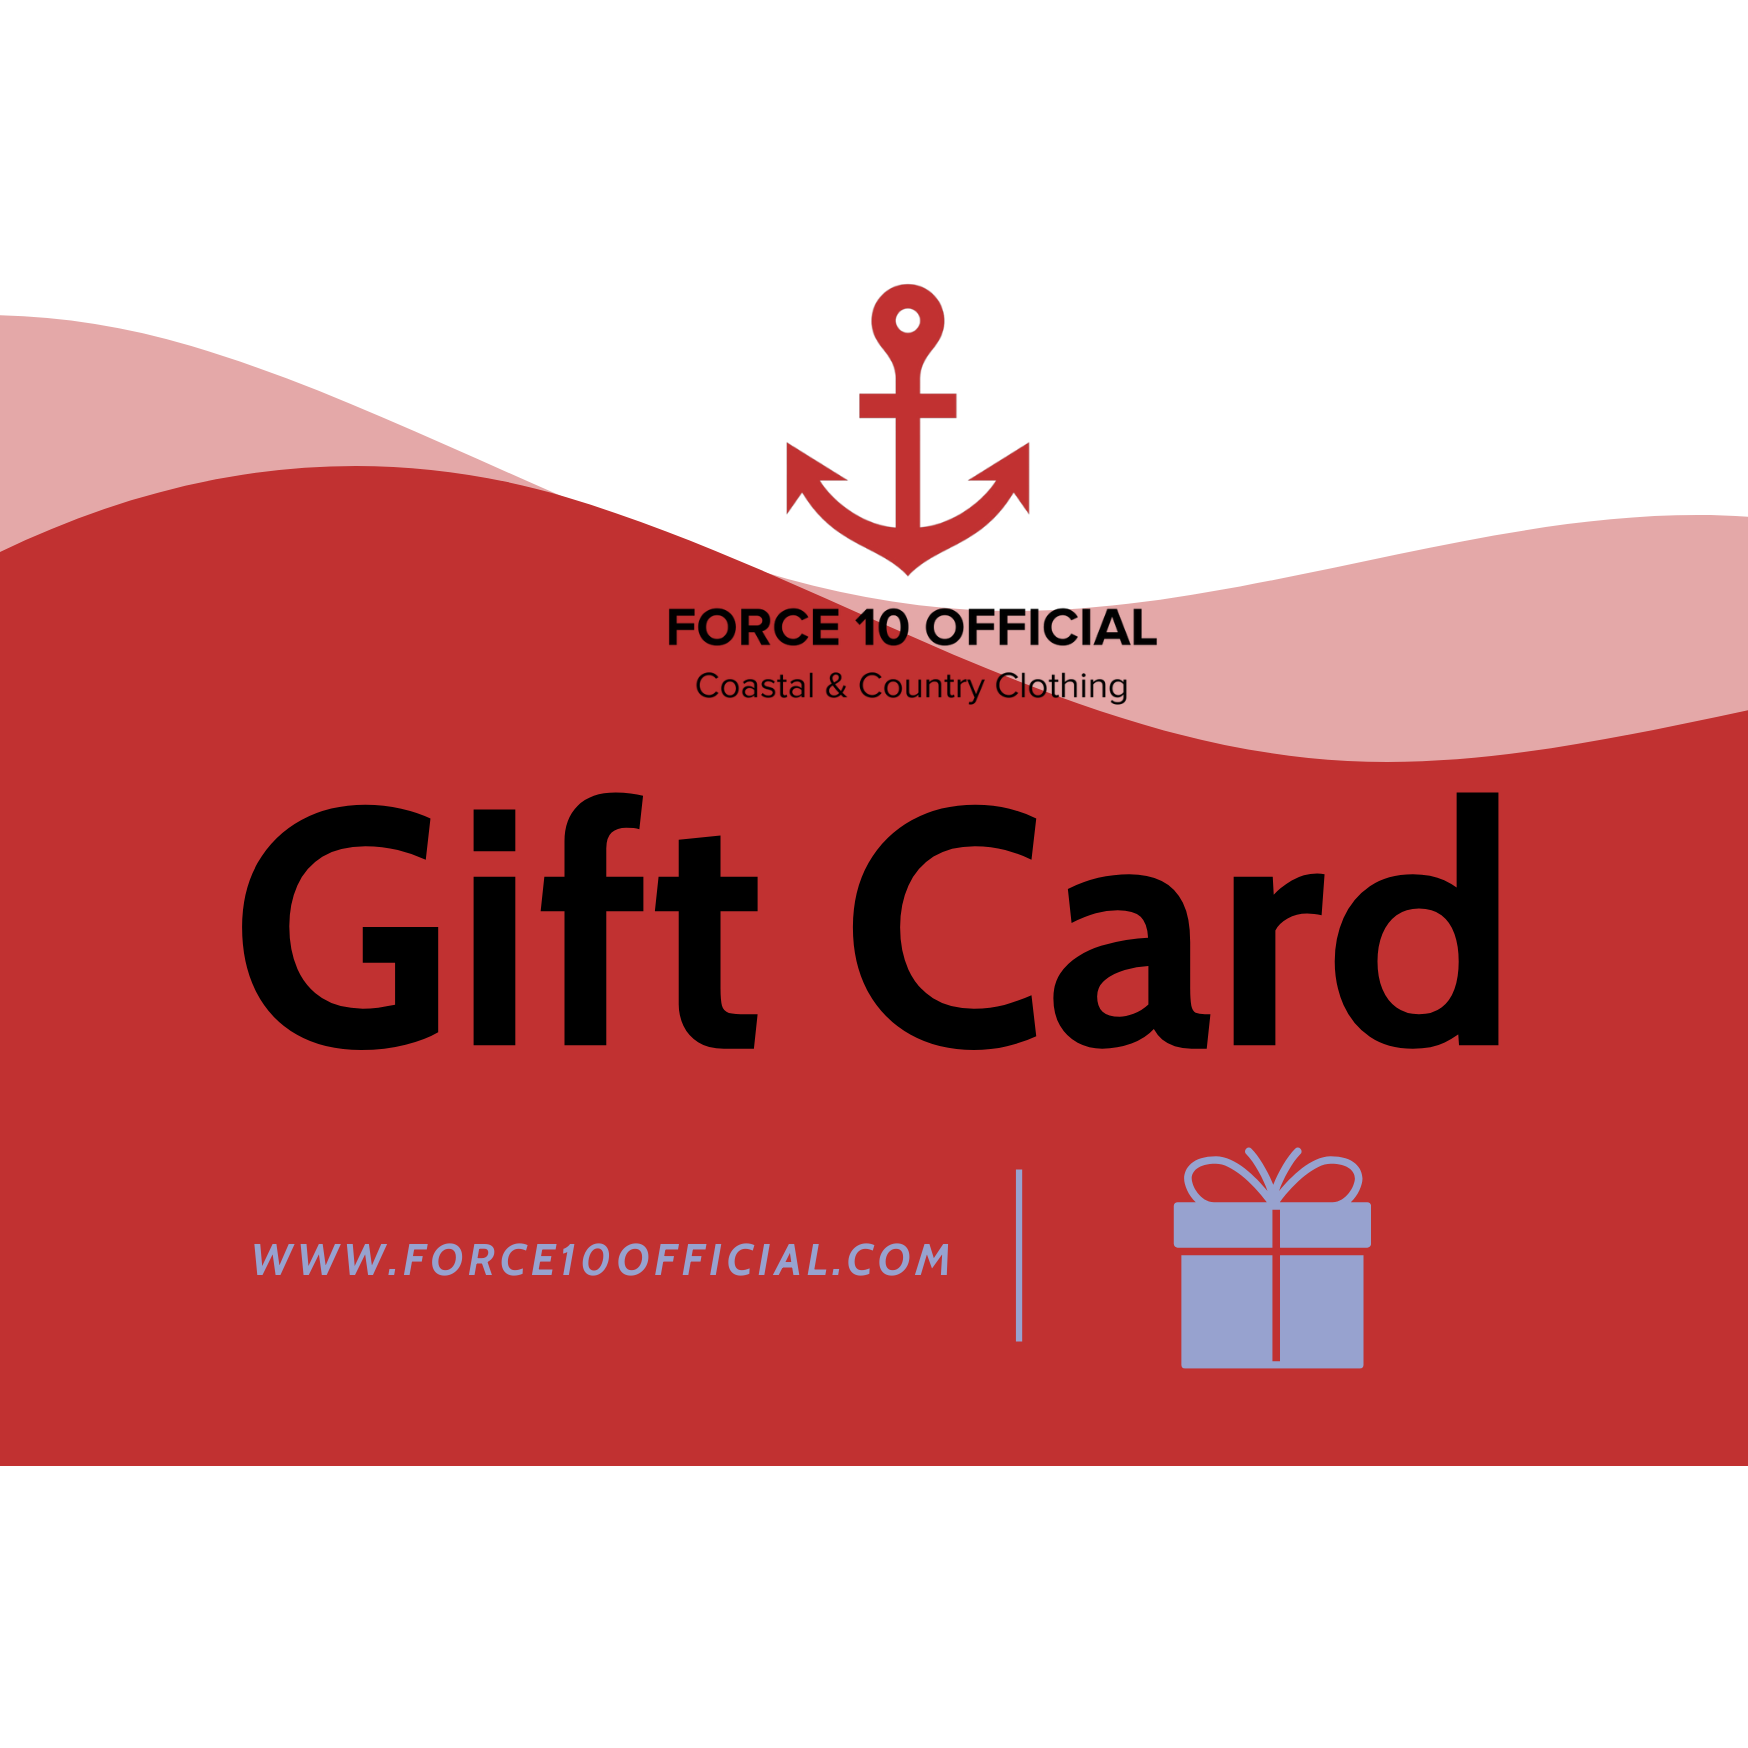 FORCE 10 OFFICIAL ⚓️ GIFT CARDS